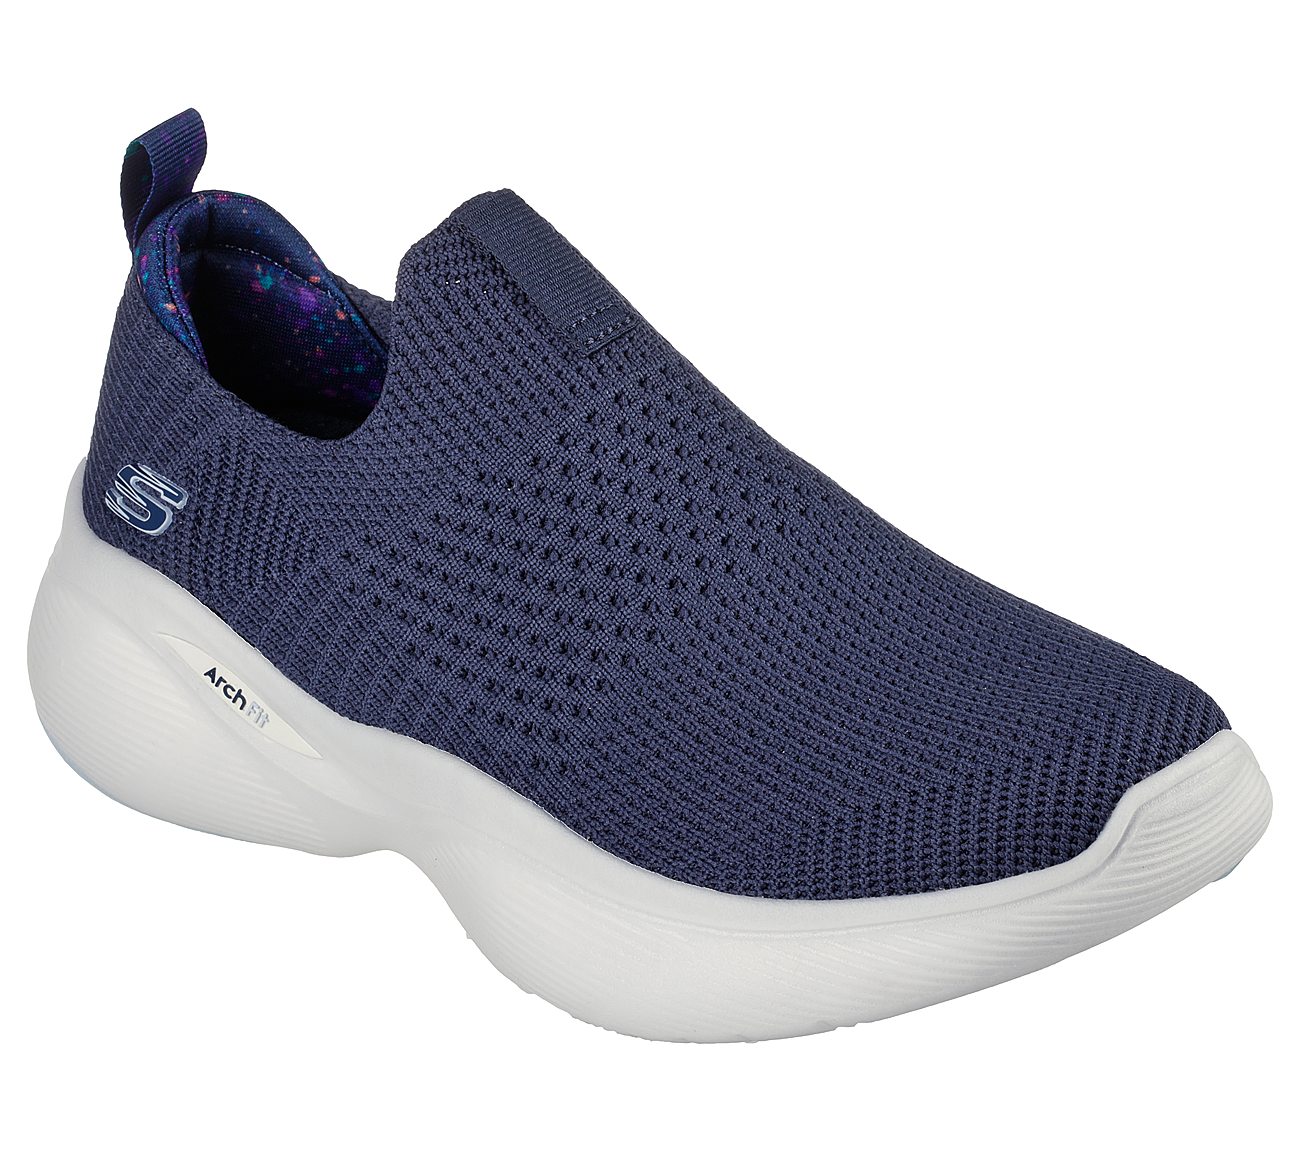 ARCH FIT INFINITY, NAVY/LAVENDER Footwear Right View